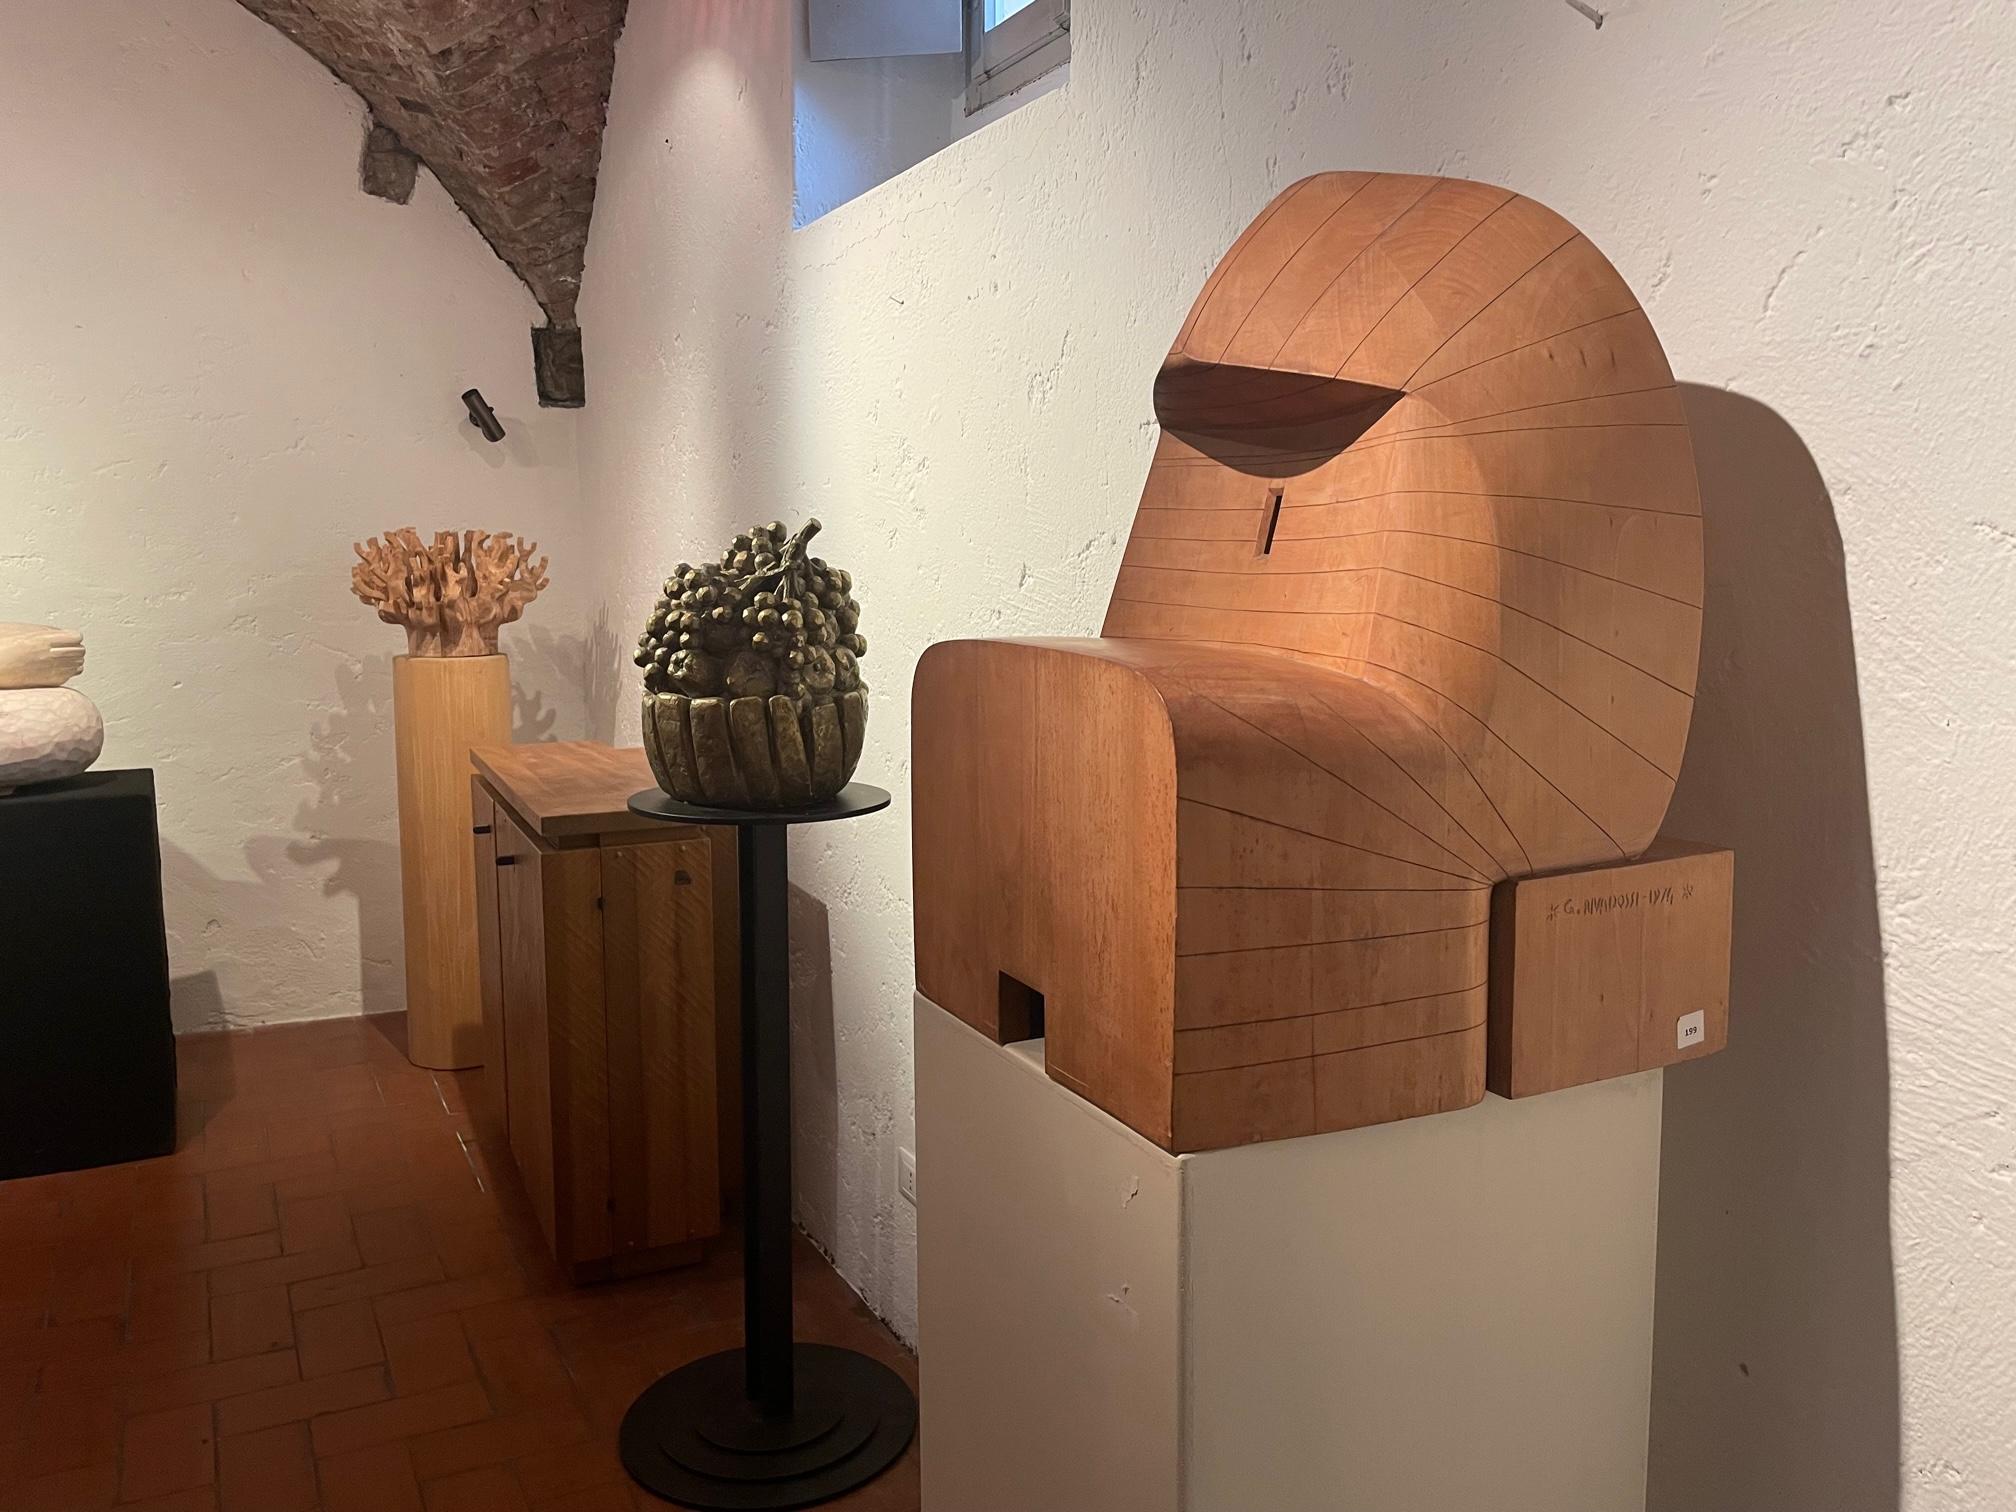 Giuseppe Rivadossi (Nave, July 8, 1935)  Shed, 1974 Wood sculpture For Sale 9